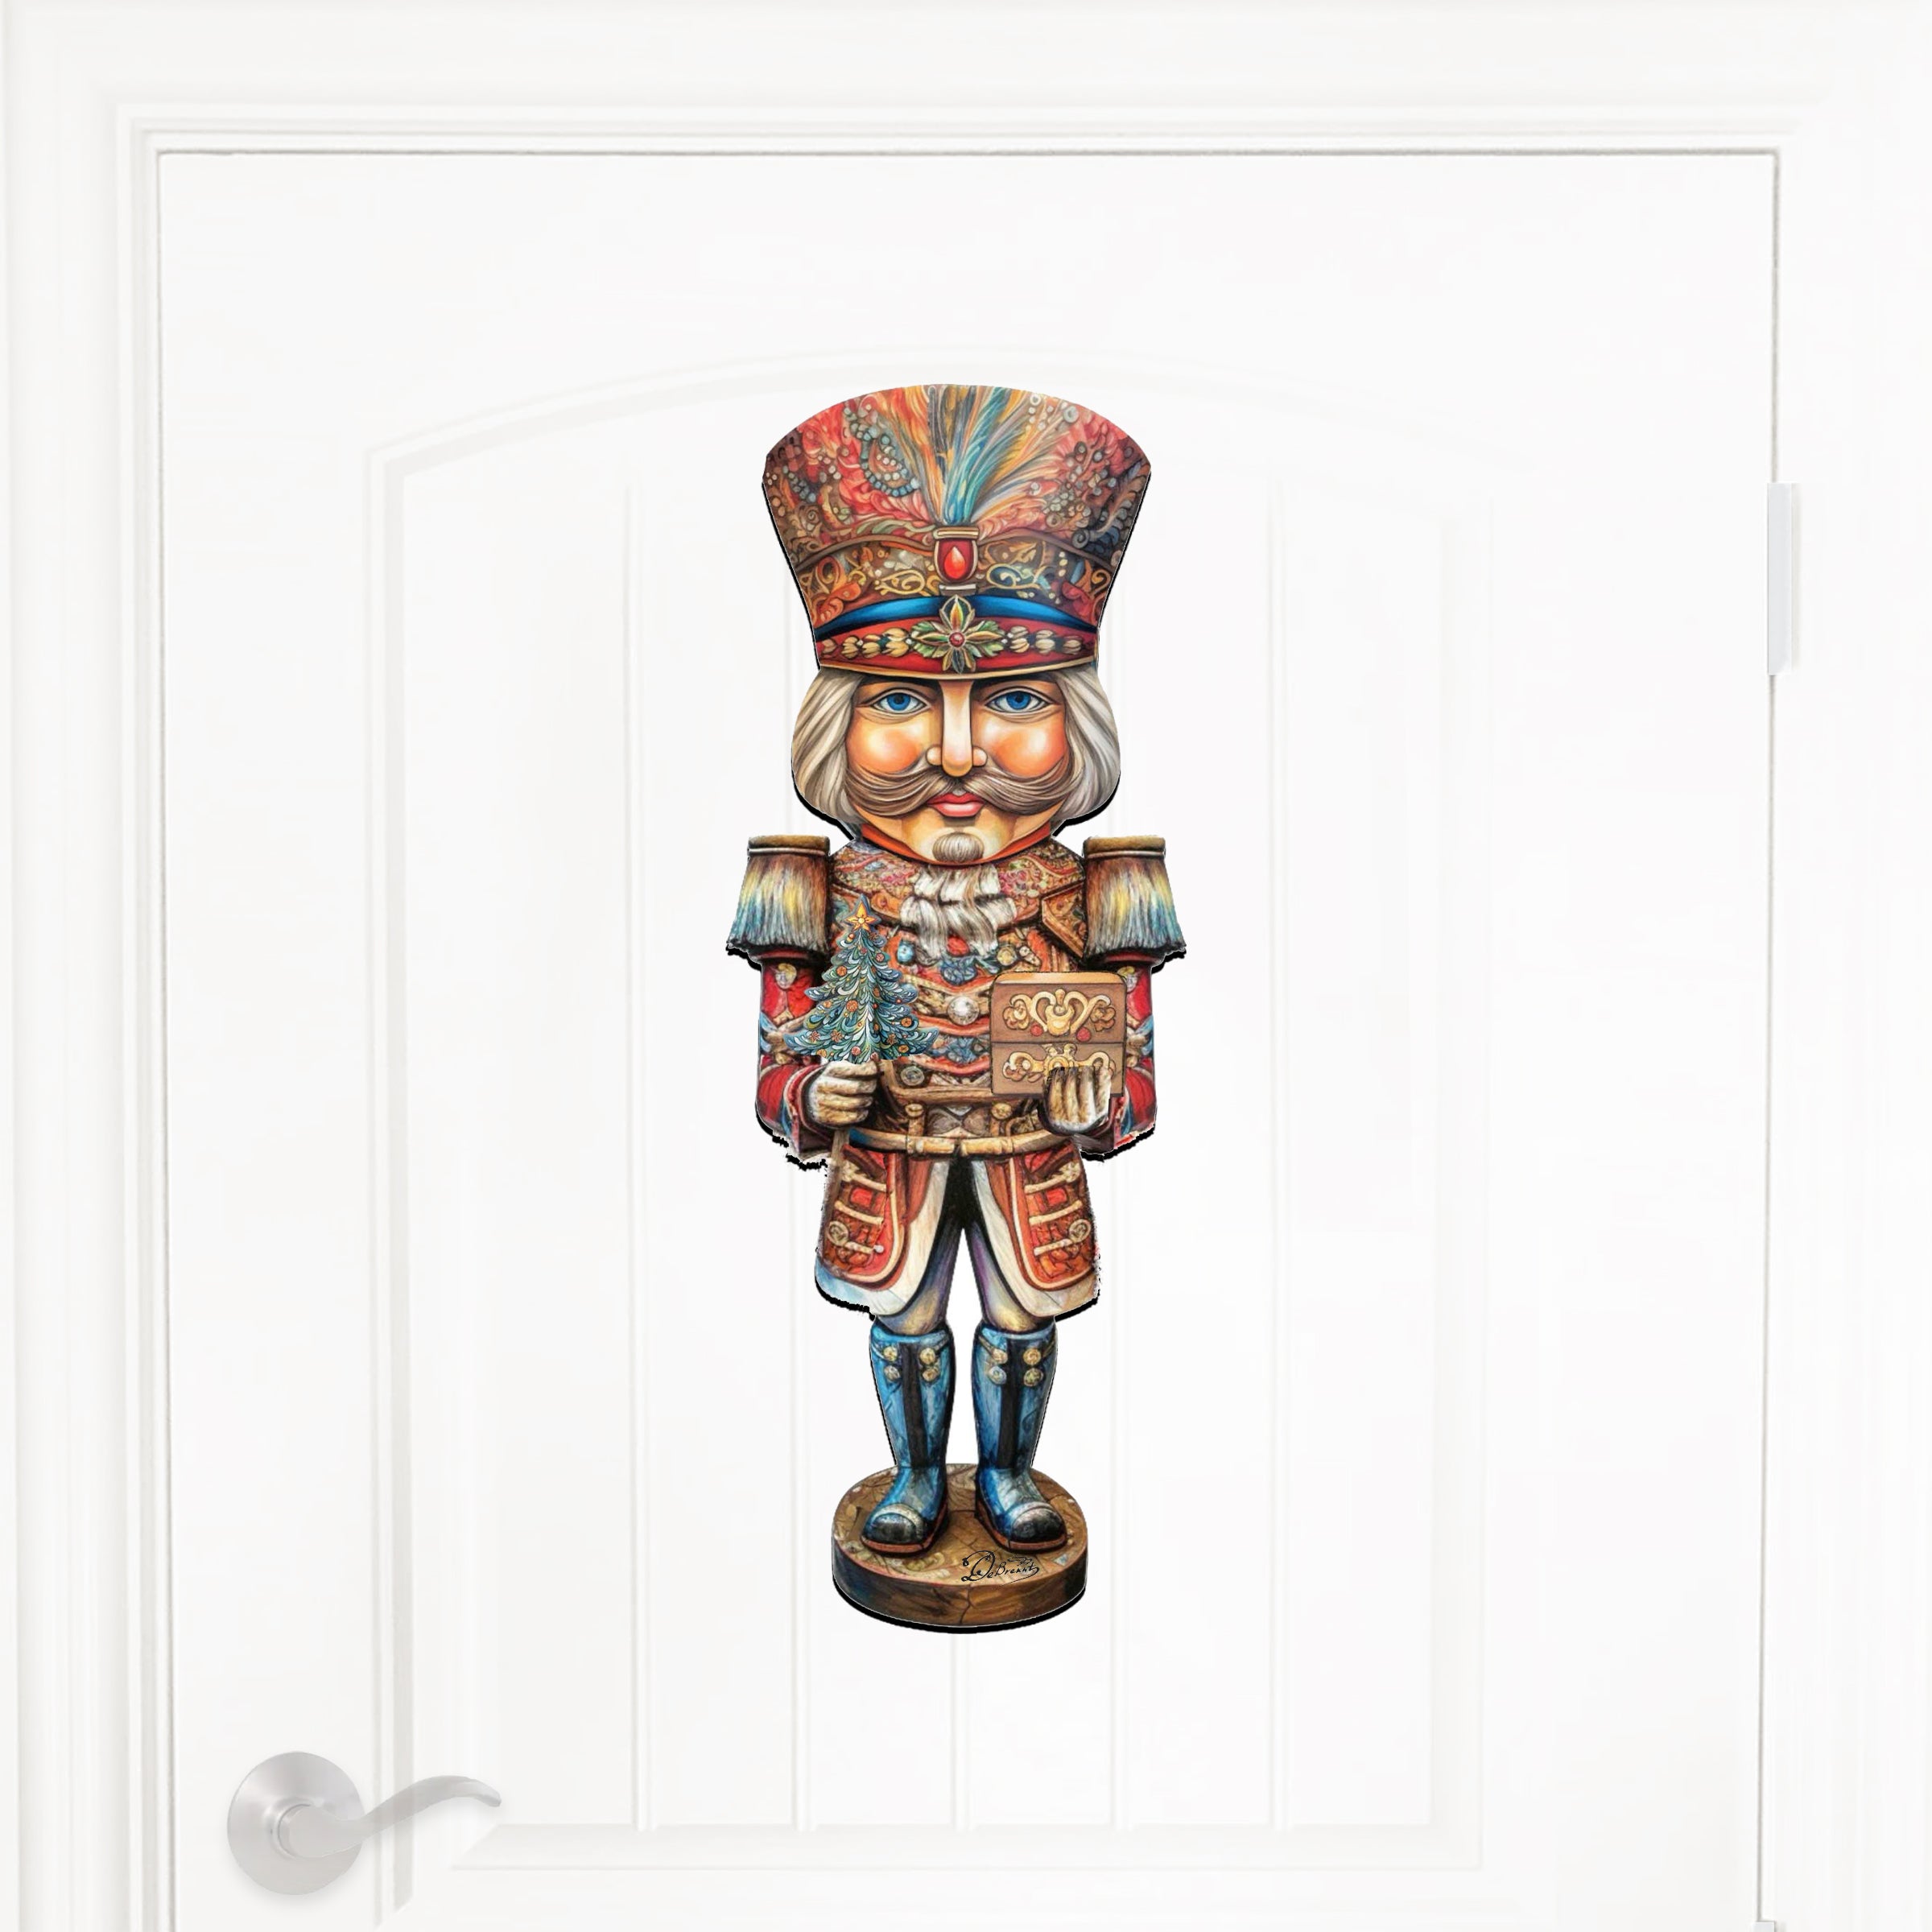 Easy to draw Nutcracker just in time for Christmas by Seaspray Illustrations